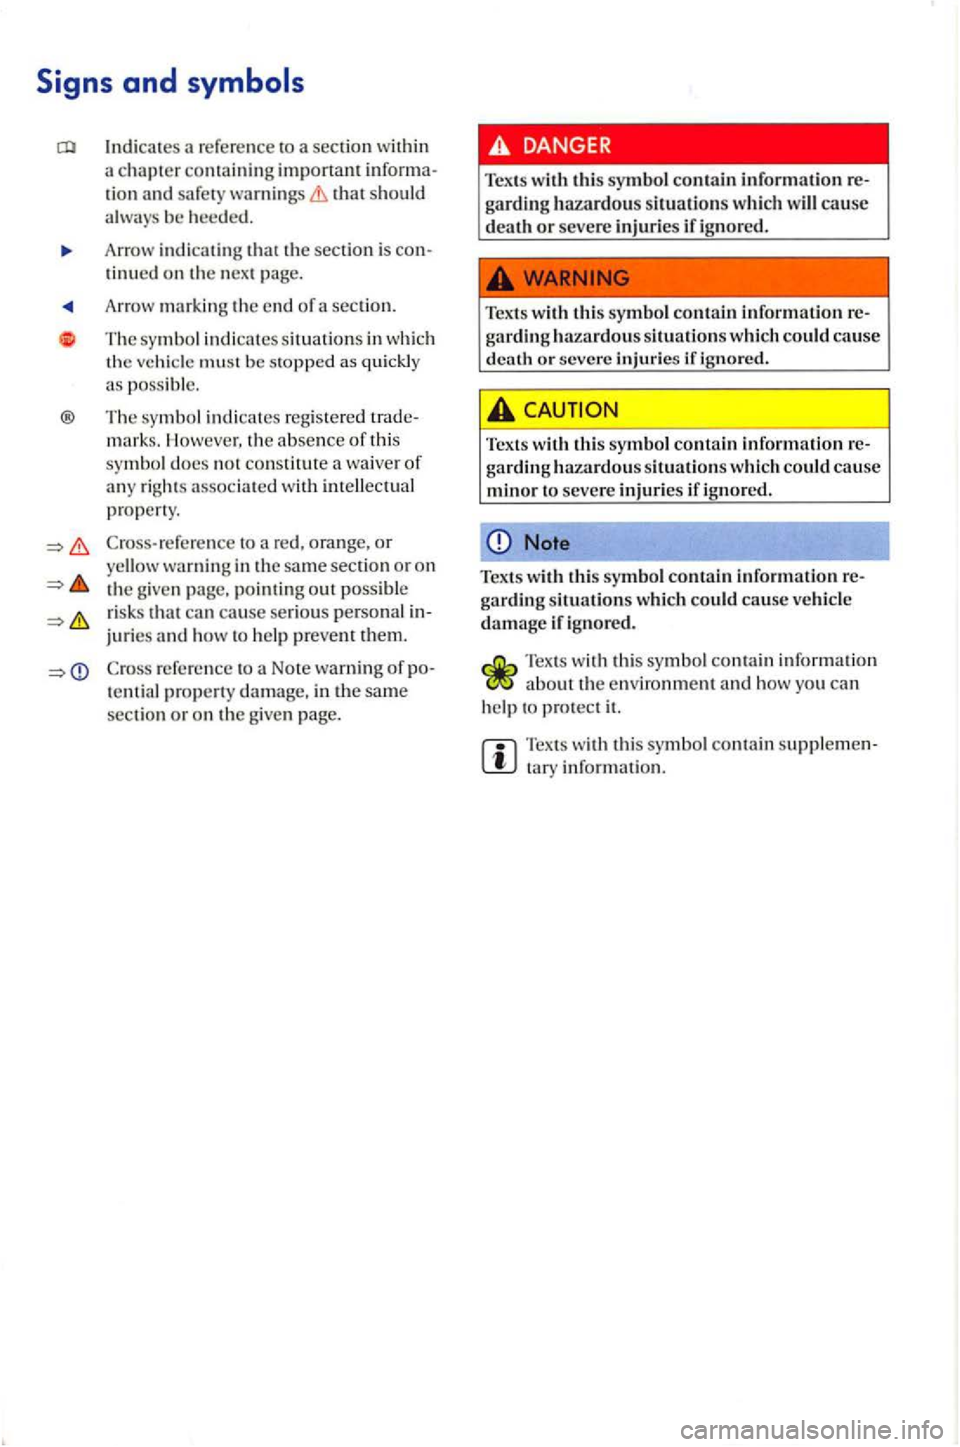 VOLKSWAGEN GOLF PLUS 2004  Owners Manual Indicates a  re fe rence  to  a section within a chapter c ontaining important tion and safe ty warnings that should a lways be heeded. 
Arrow  indicating that the section is tinued on th e nex t page